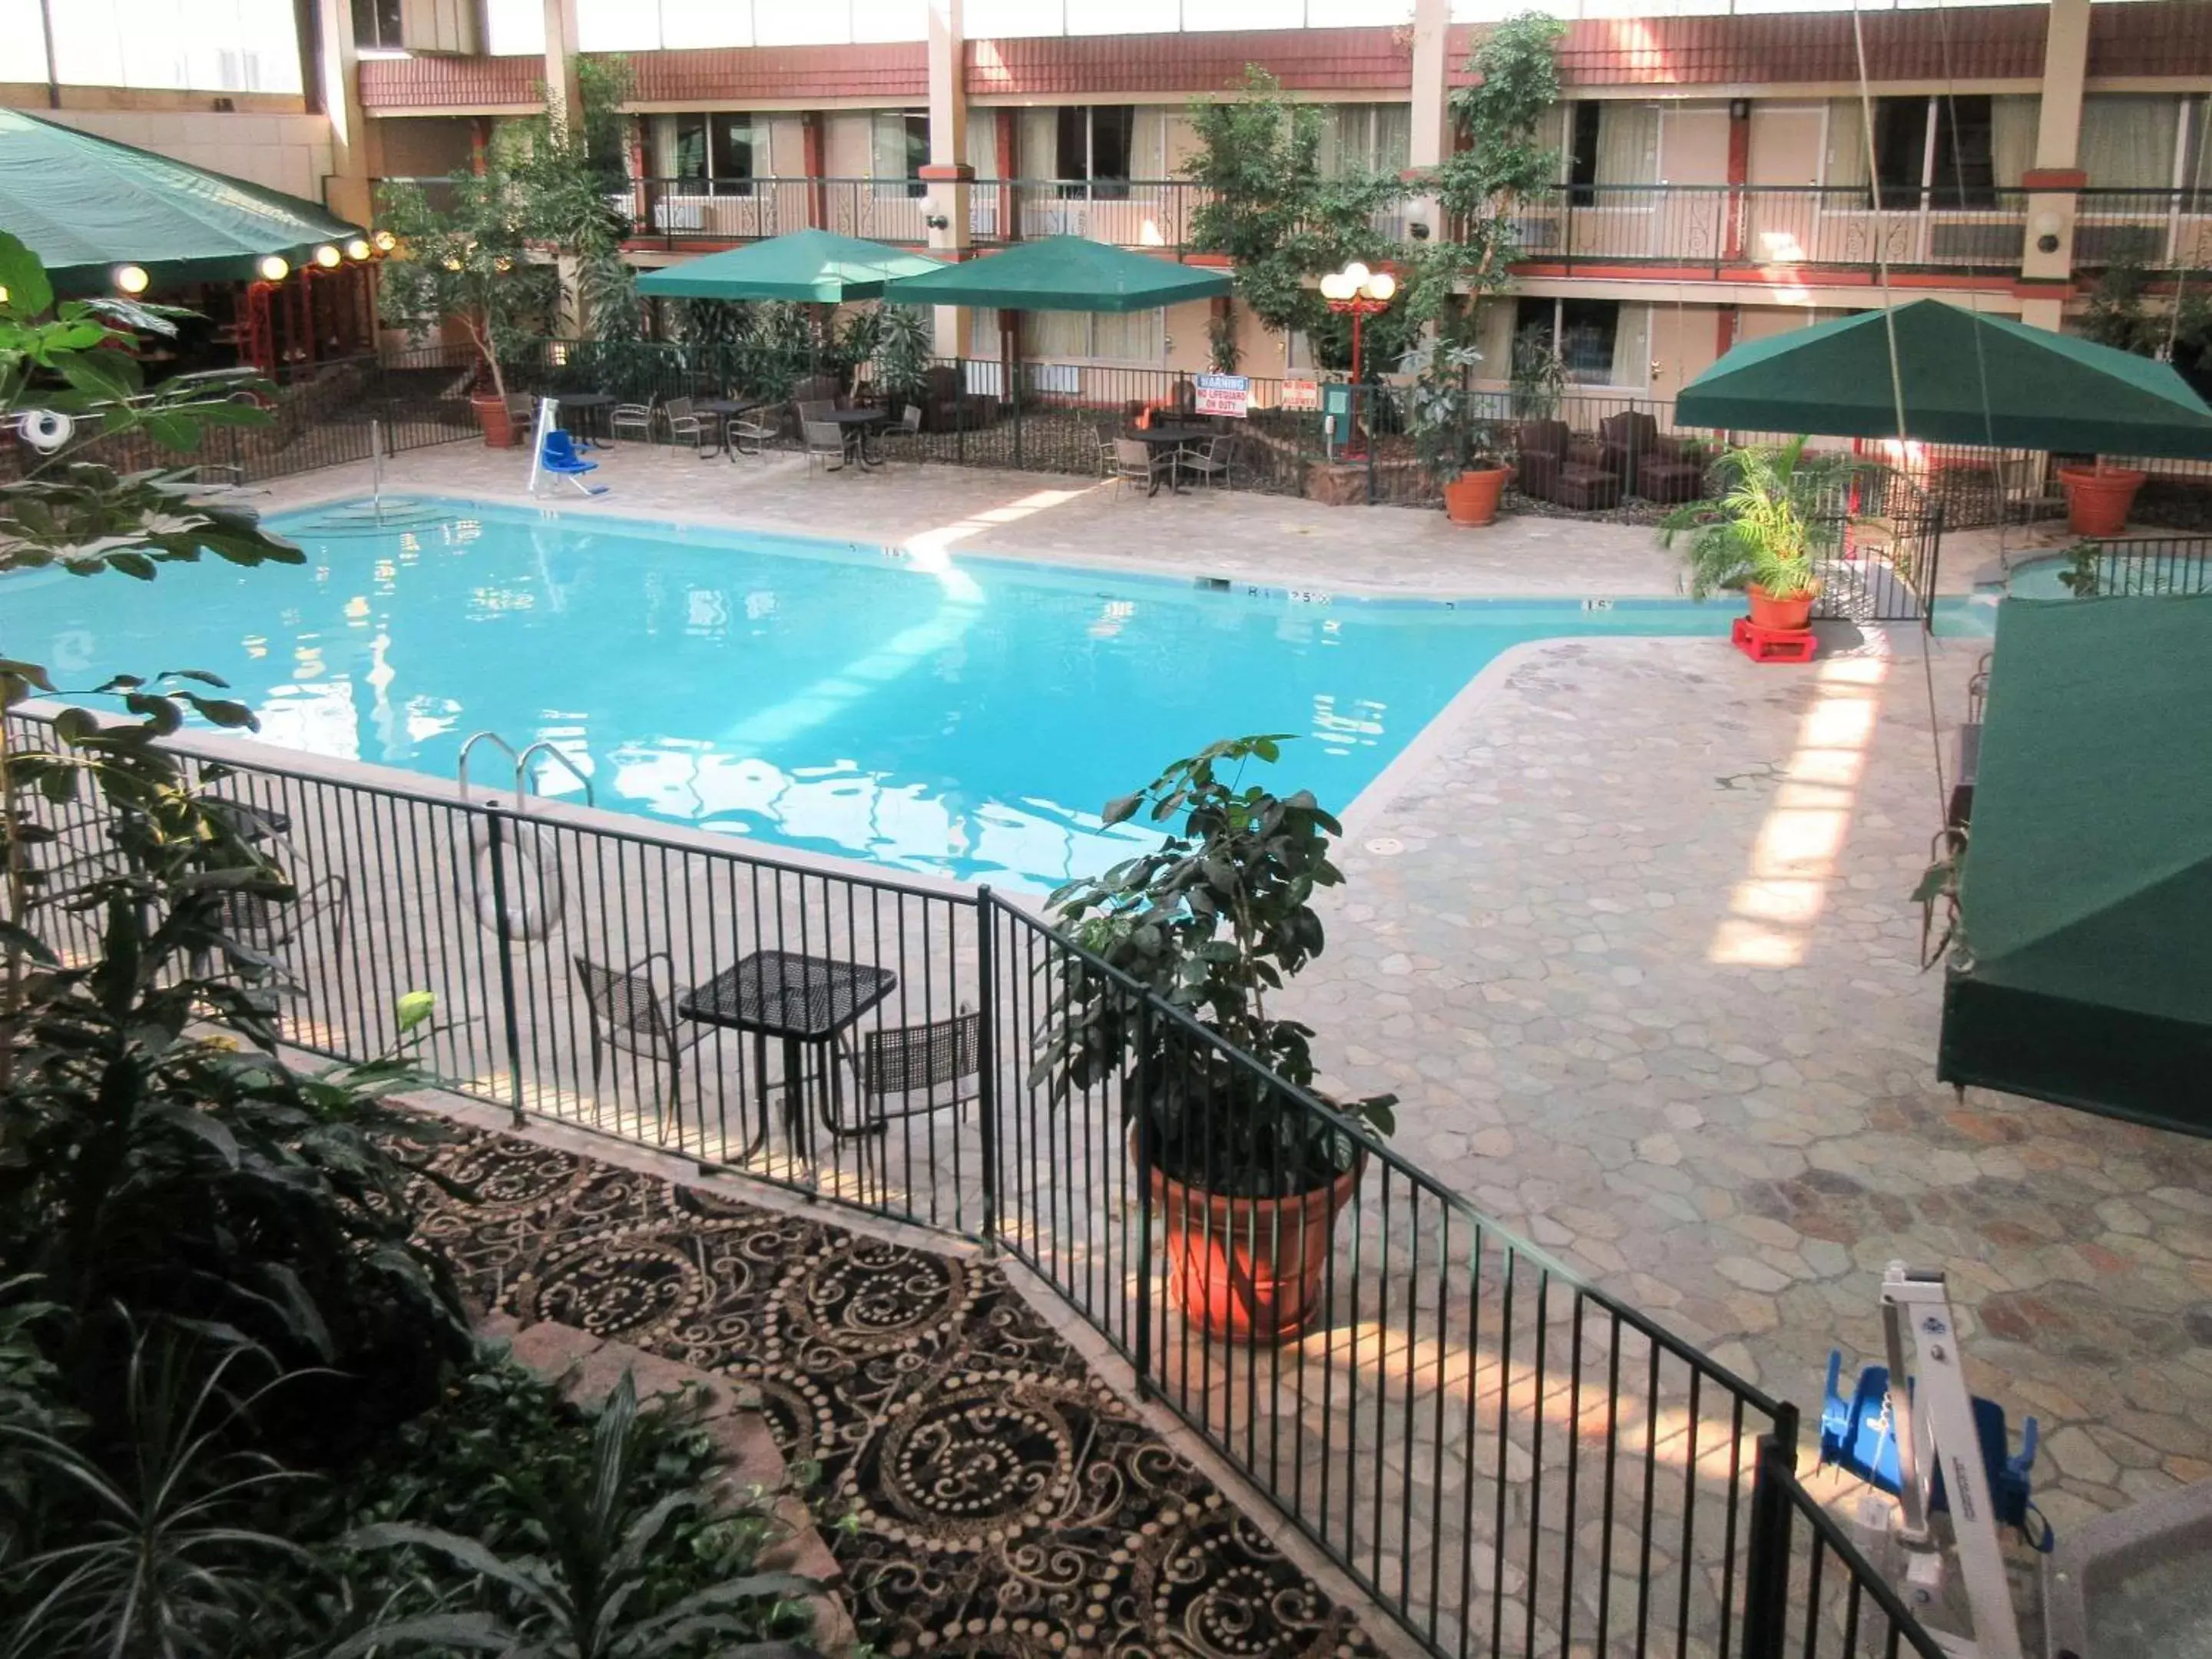 On site, Pool View in Clarion Inn Fort Collins